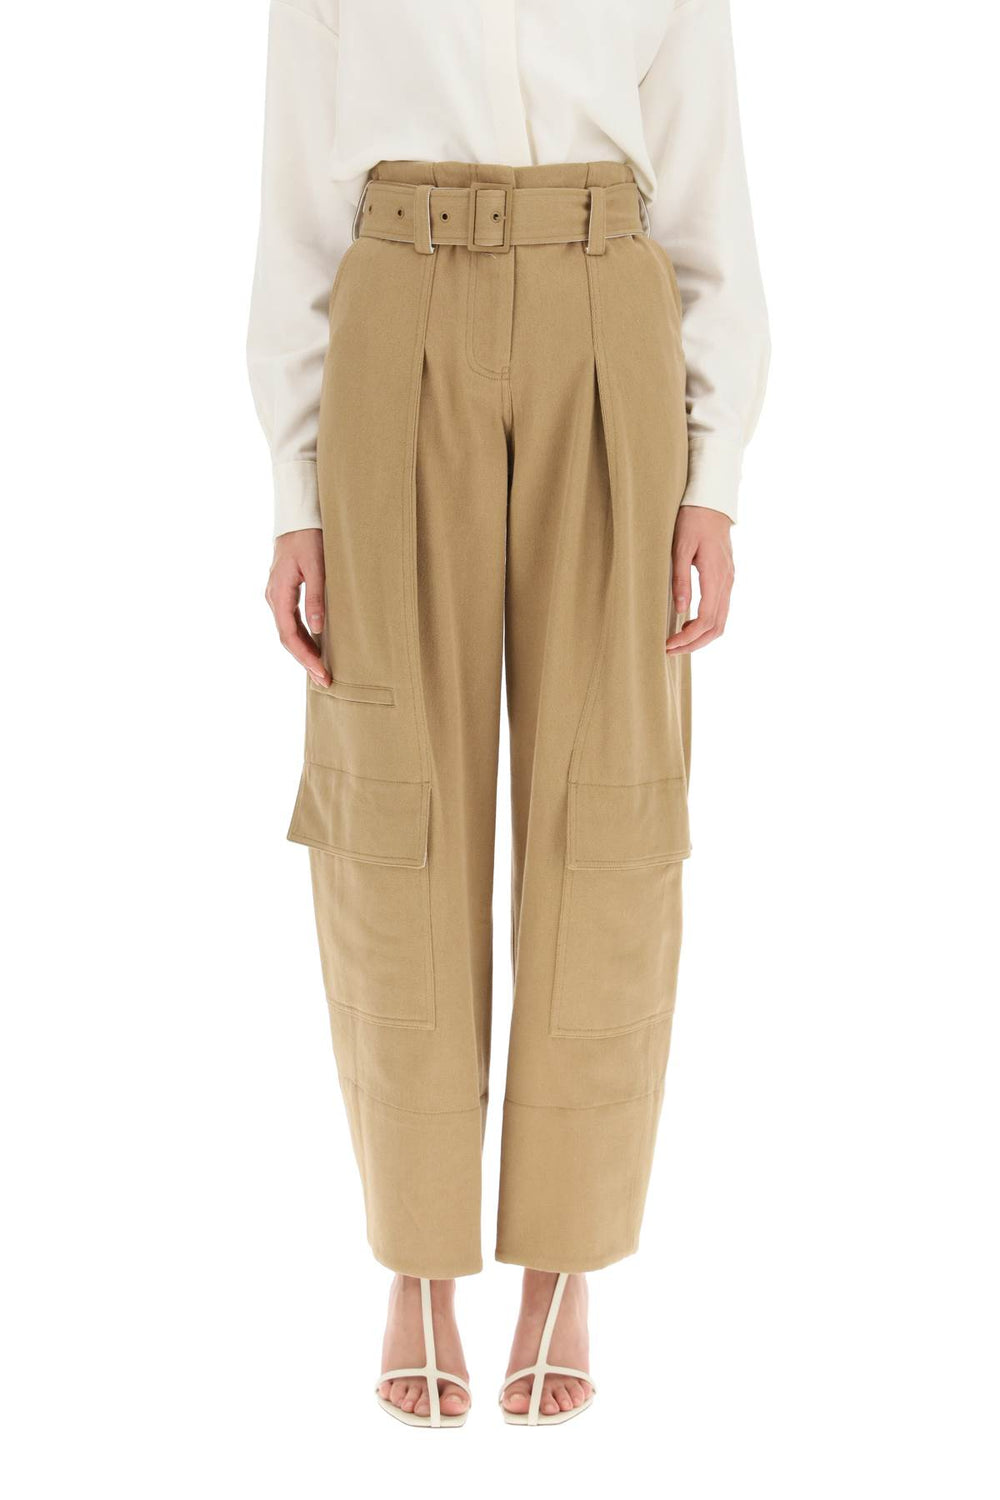 Low classic cargo pants with matching belt-1